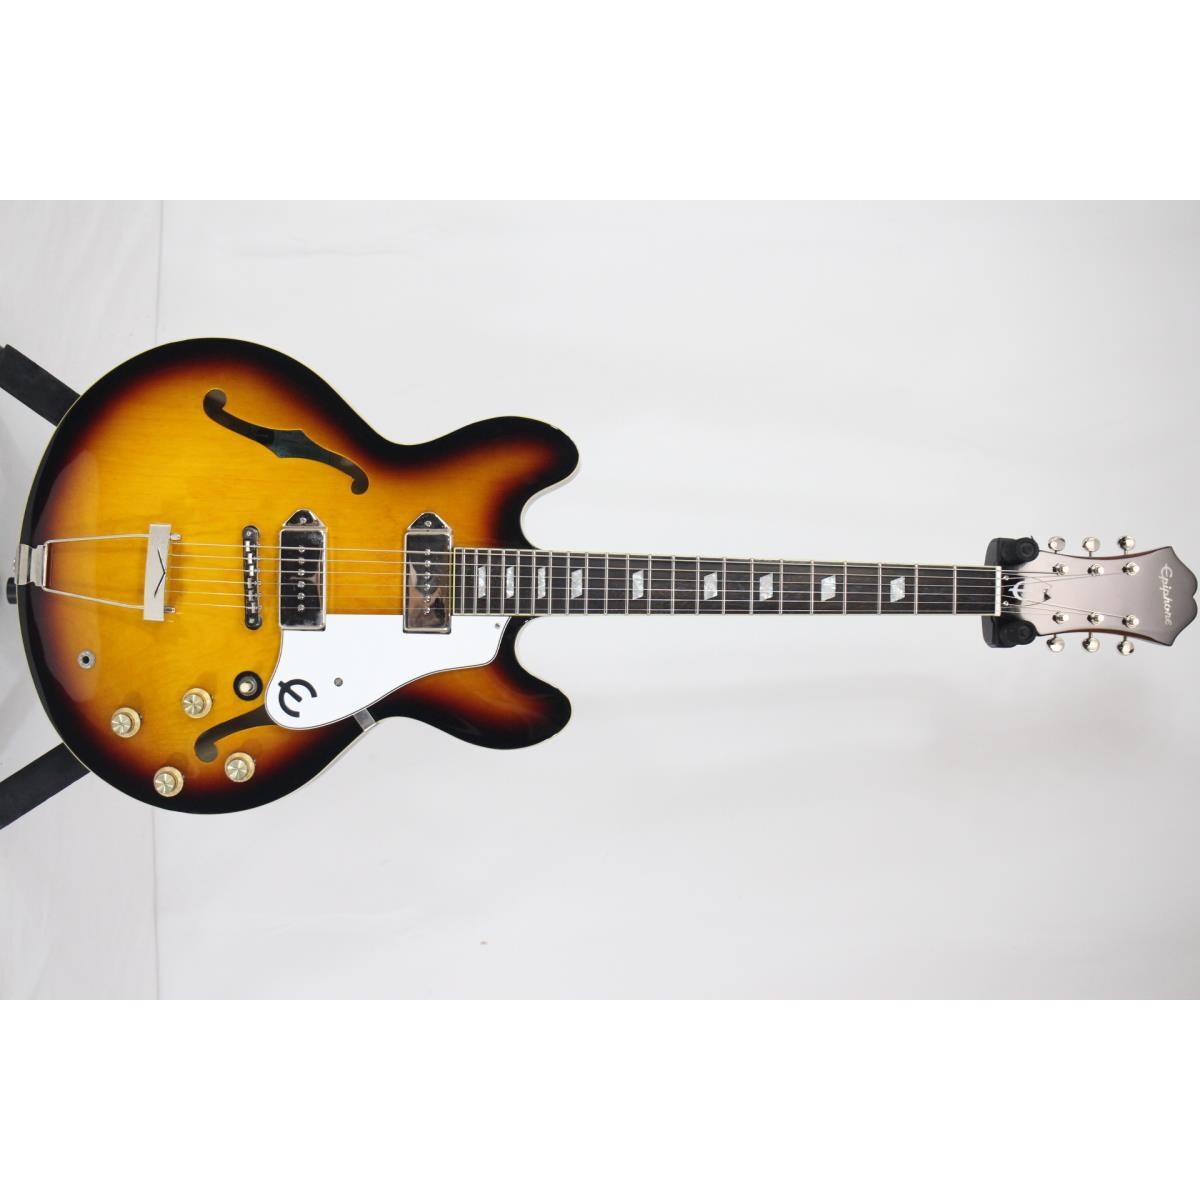 EPIPHONE INSPIRED BY JL 1965 CASIN